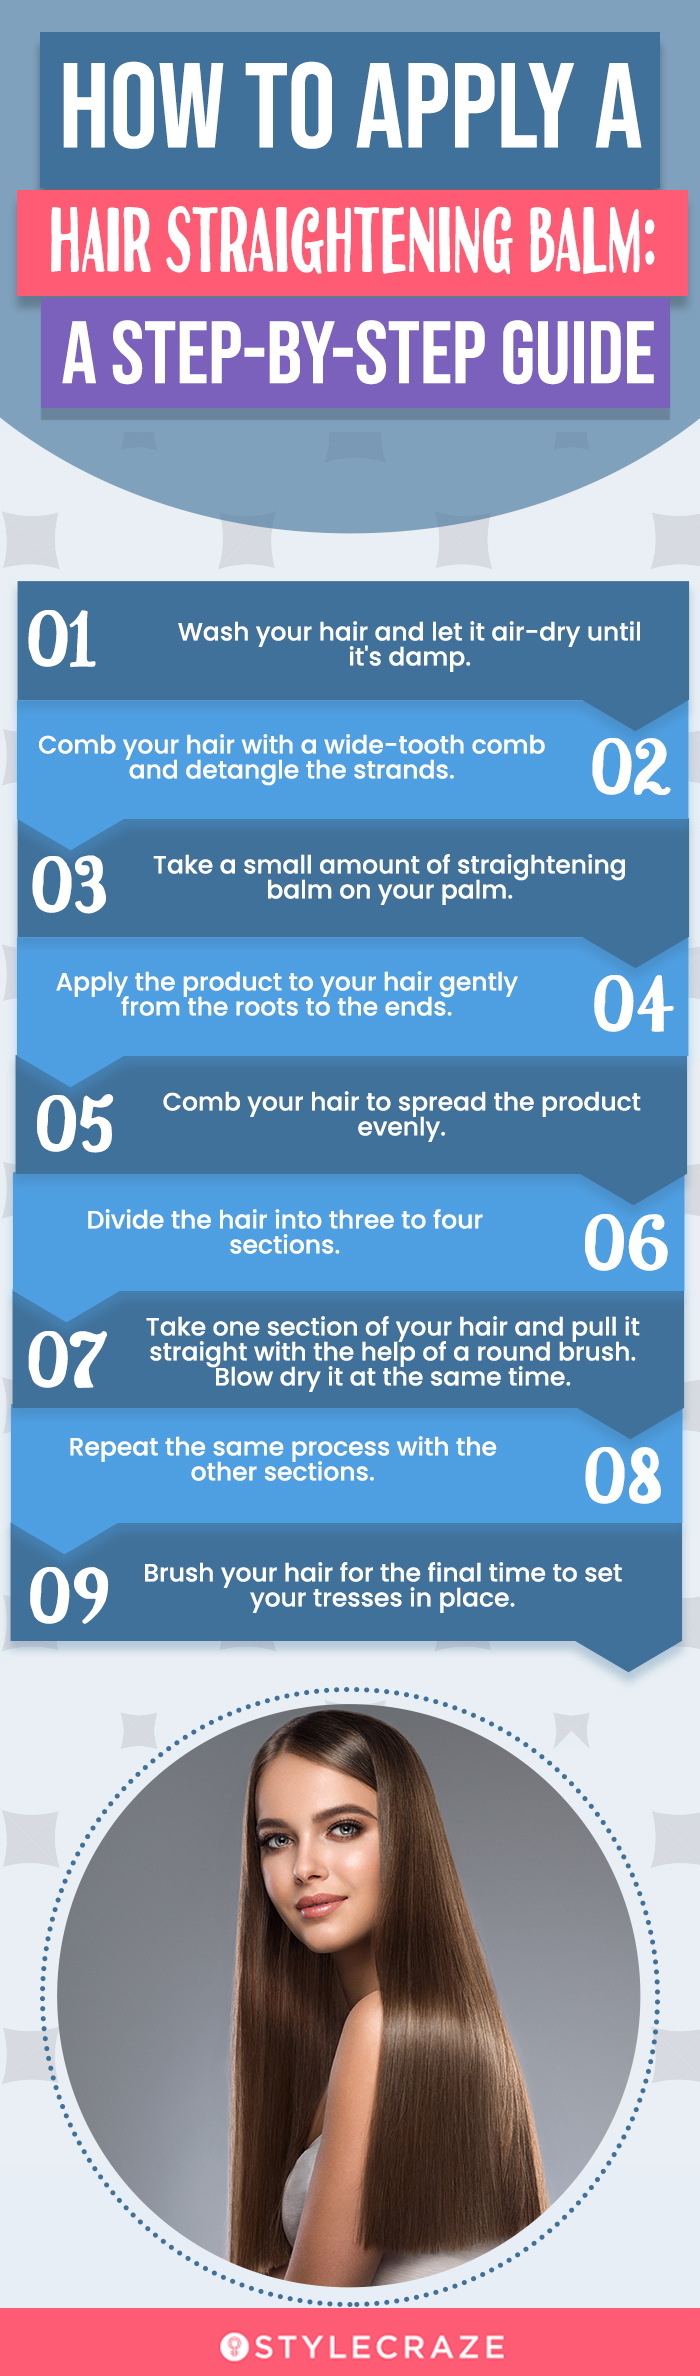 Step-By-Step Guide To Apply A Hair Straightening Balm (infographic)